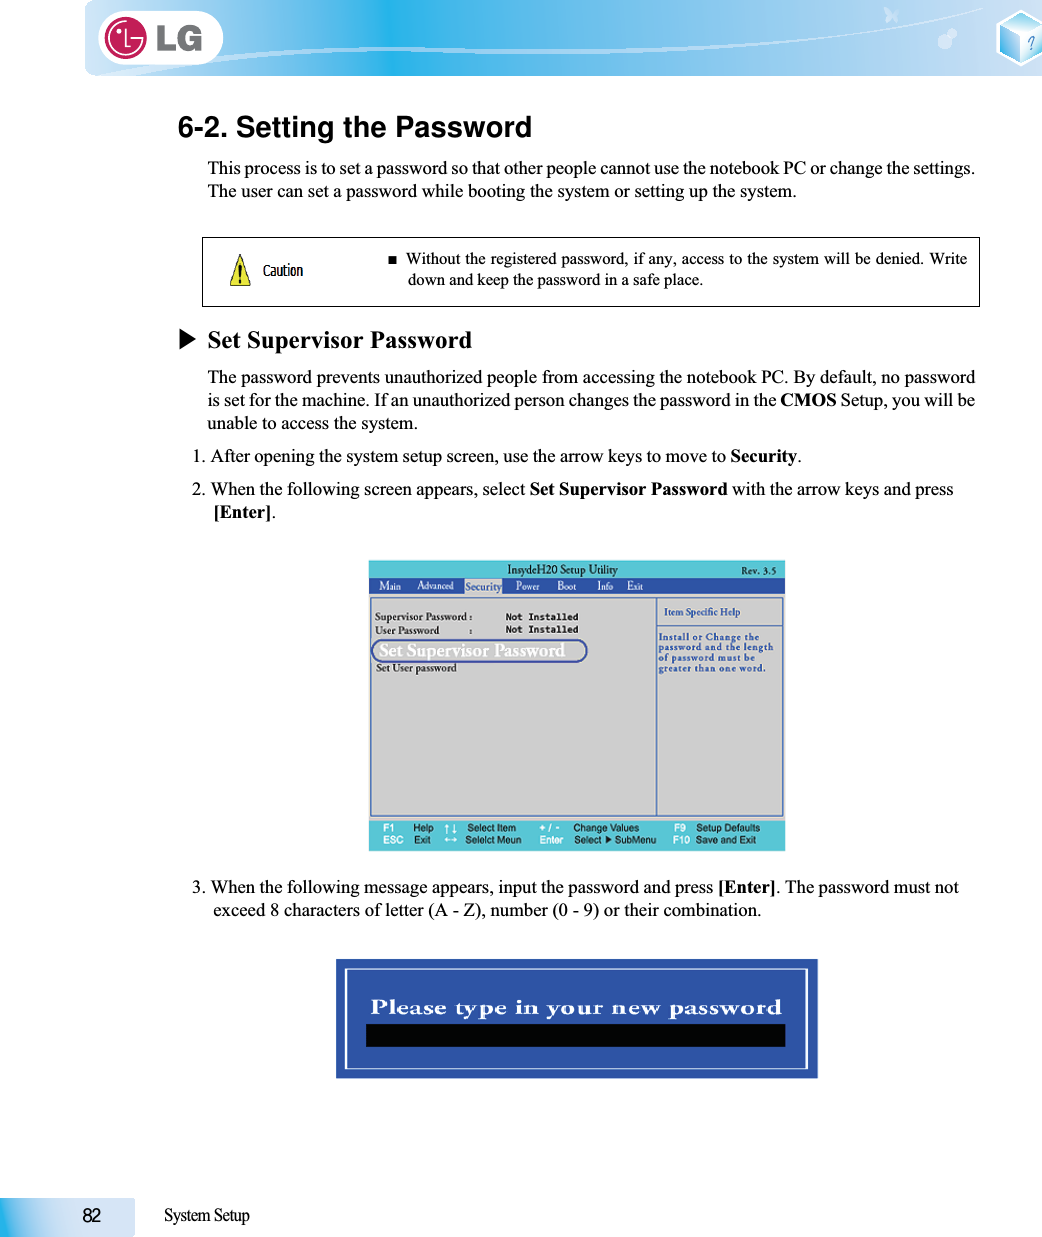 System Setup6-2. Setting the PasswordThis process is to set a password so that other people cannot use the notebook PC or change the settings.The user can set a password while booting the system or setting up the system.XSet Supervisor PasswordThe password prevents unauthorized people from accessing the notebook PC. By default, no passwordis set for the machine. If an unauthorized person changes the password in the CMOS Setup, you will beunable to access the system.1. After opening the system setup screen, use the arrow keys to move to Security.2. When the following screen appears, select Set Supervisor Password with the arrow keys and press [Enter].3. When the following message appears, input the password and press [Enter]. The password must not exceed 8 characters of letter (A - Z), number (0 - 9) or their combination.ŶWithout the registered password, if any, access to the system will be denied. Writedown and keep the password in a safe place.